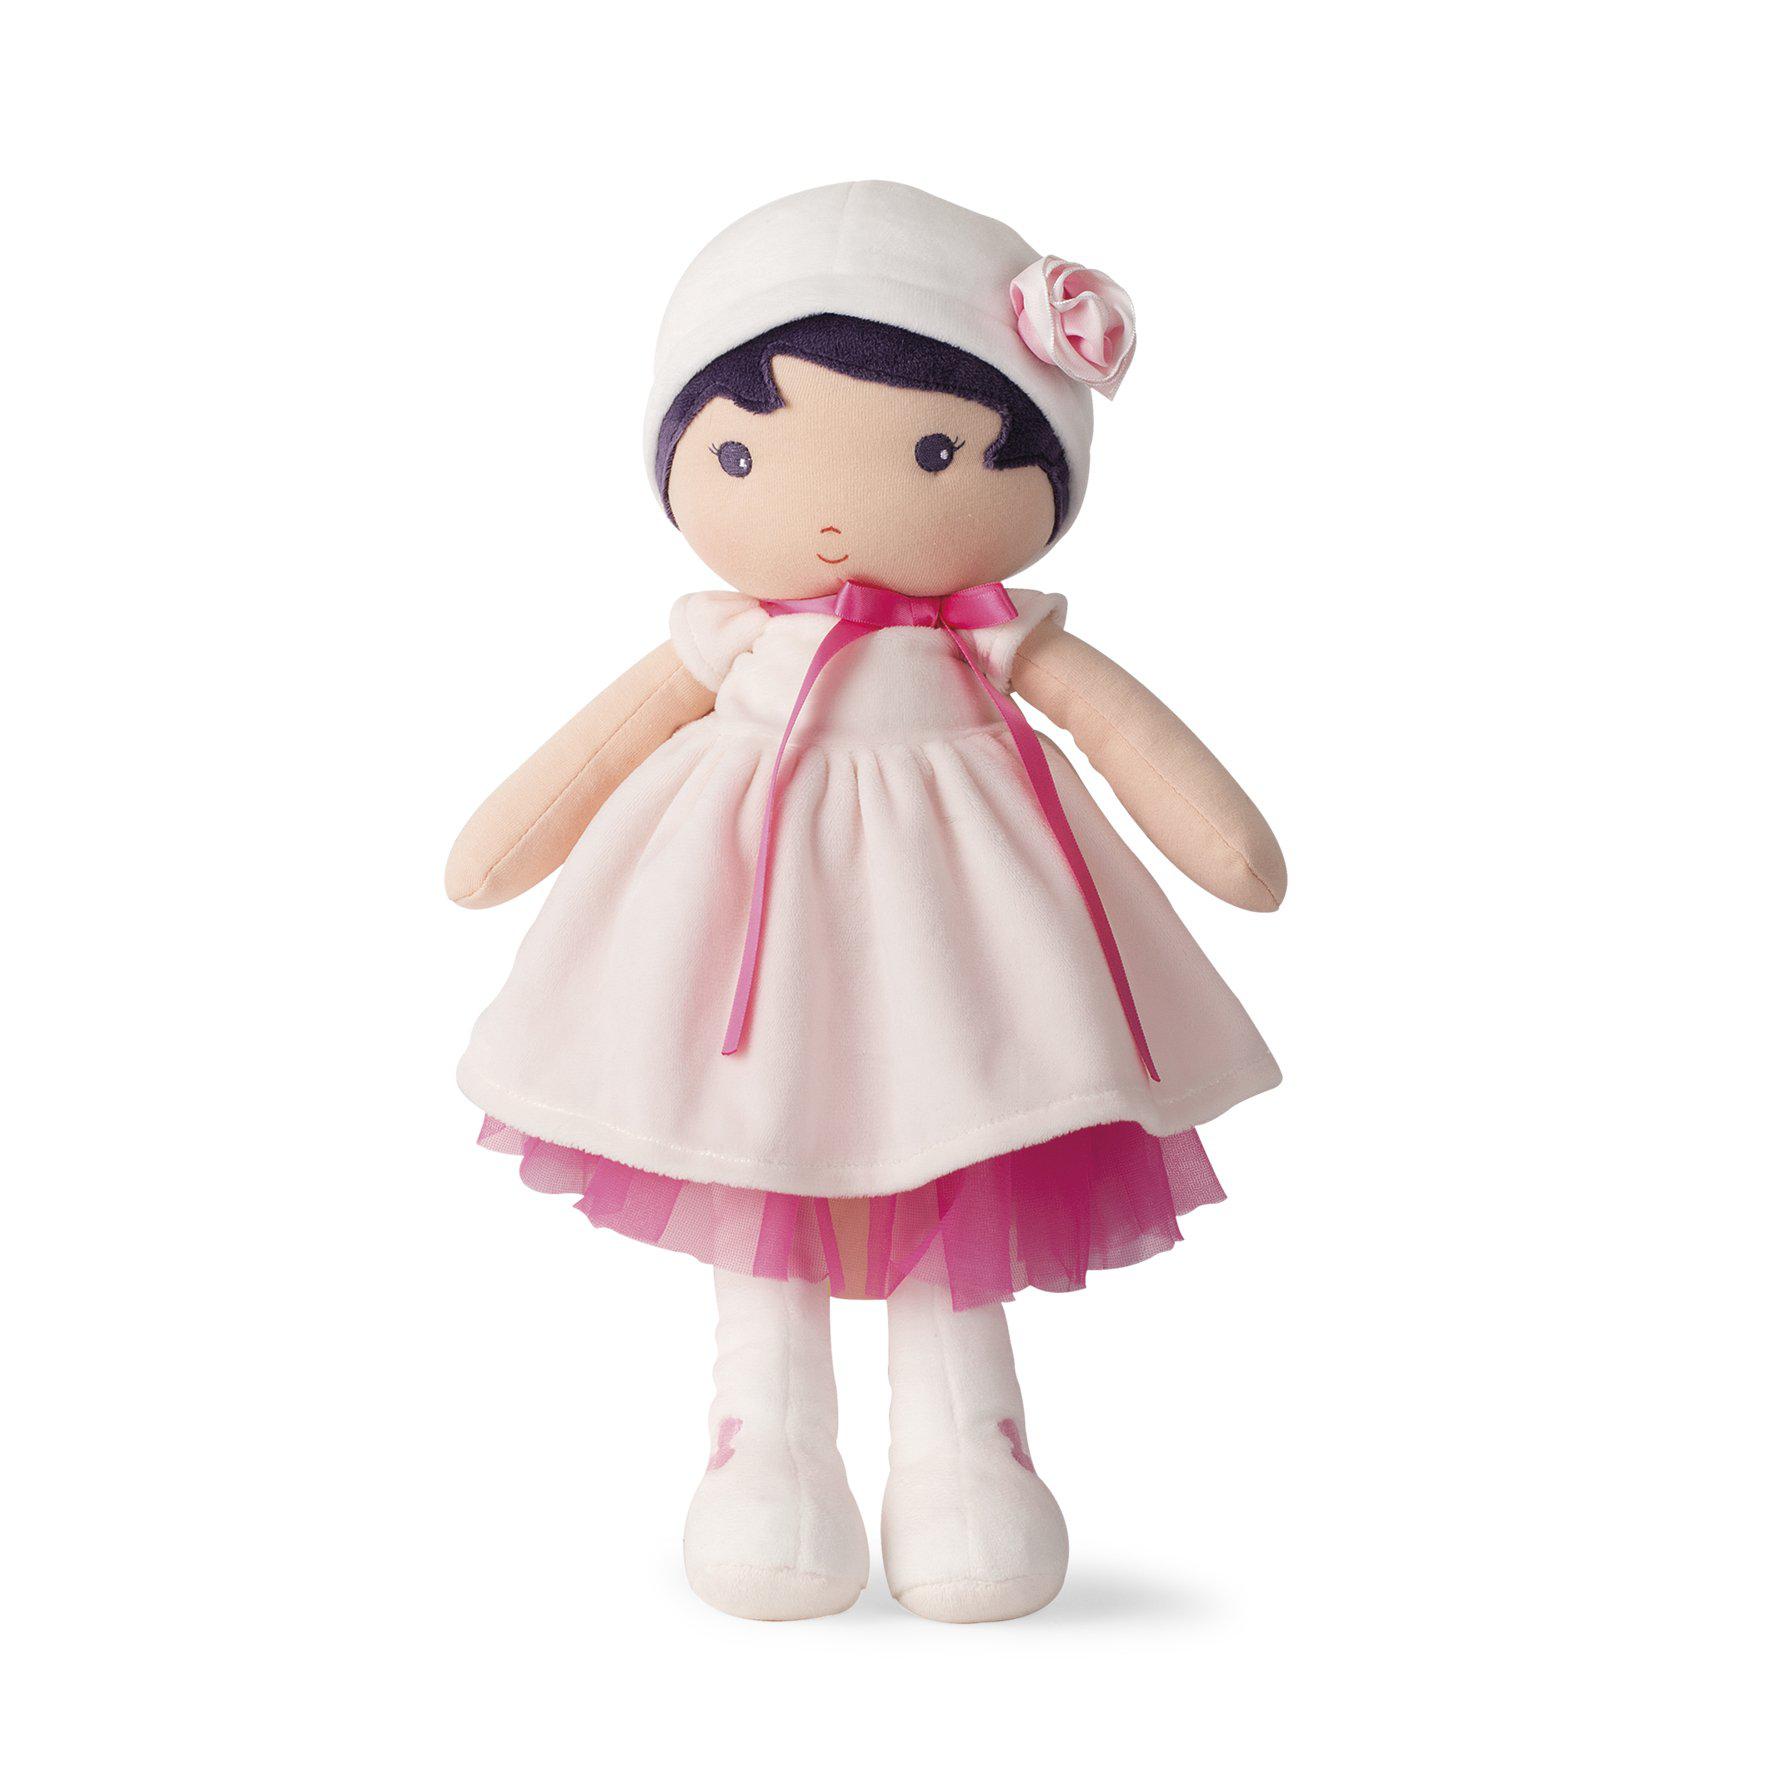 kaloo tendresse my first fabric doll perle k 15.6 xl - machine washable - ages 0+ - k962089